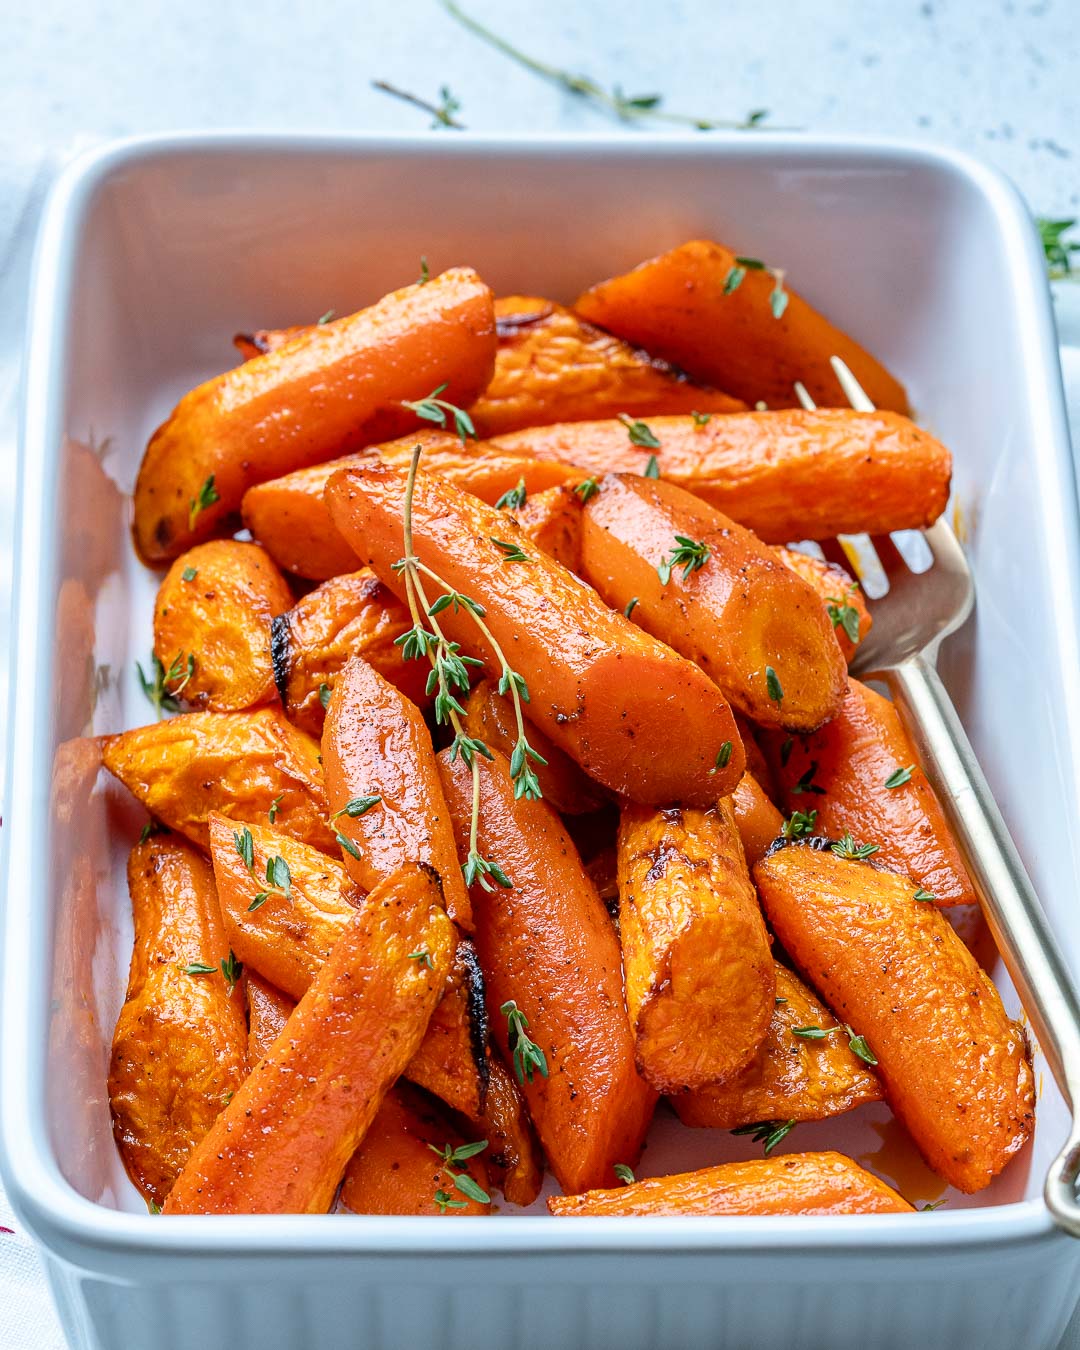 Easy Roasted Carrots for a Healthy Side Dish Idea! | Clean Food Crush